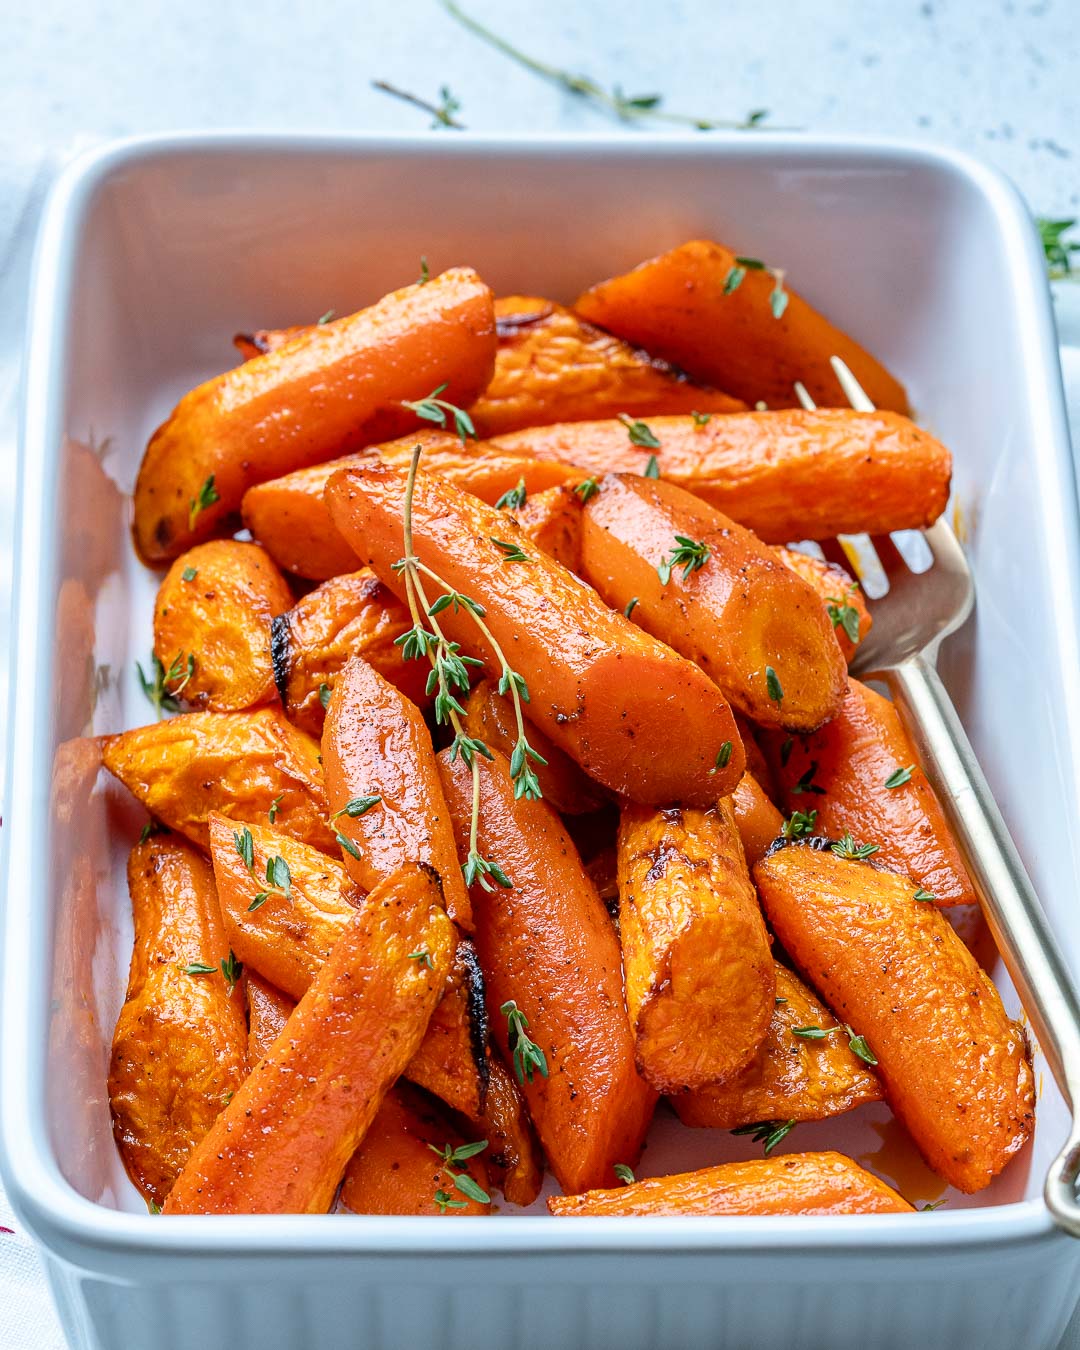 Easy Roasted Carrots for a Healthy Side Dish Idea! | Clean Food Crush